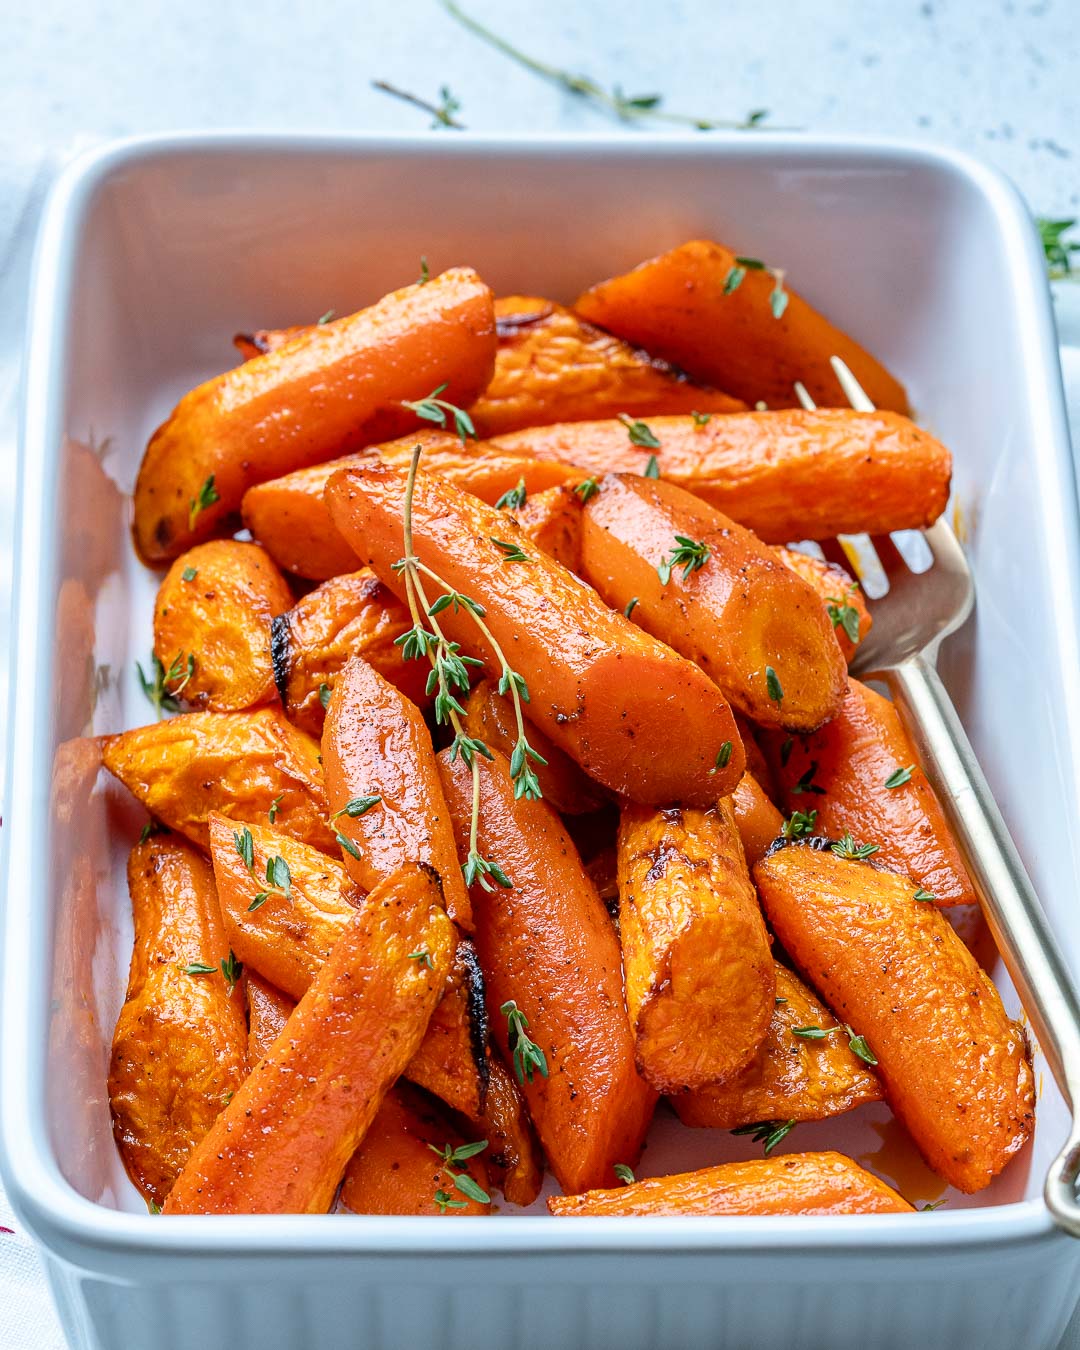 Easy Roasted Carrots for a Healthy Side Dish Idea! | Clean Food Crush